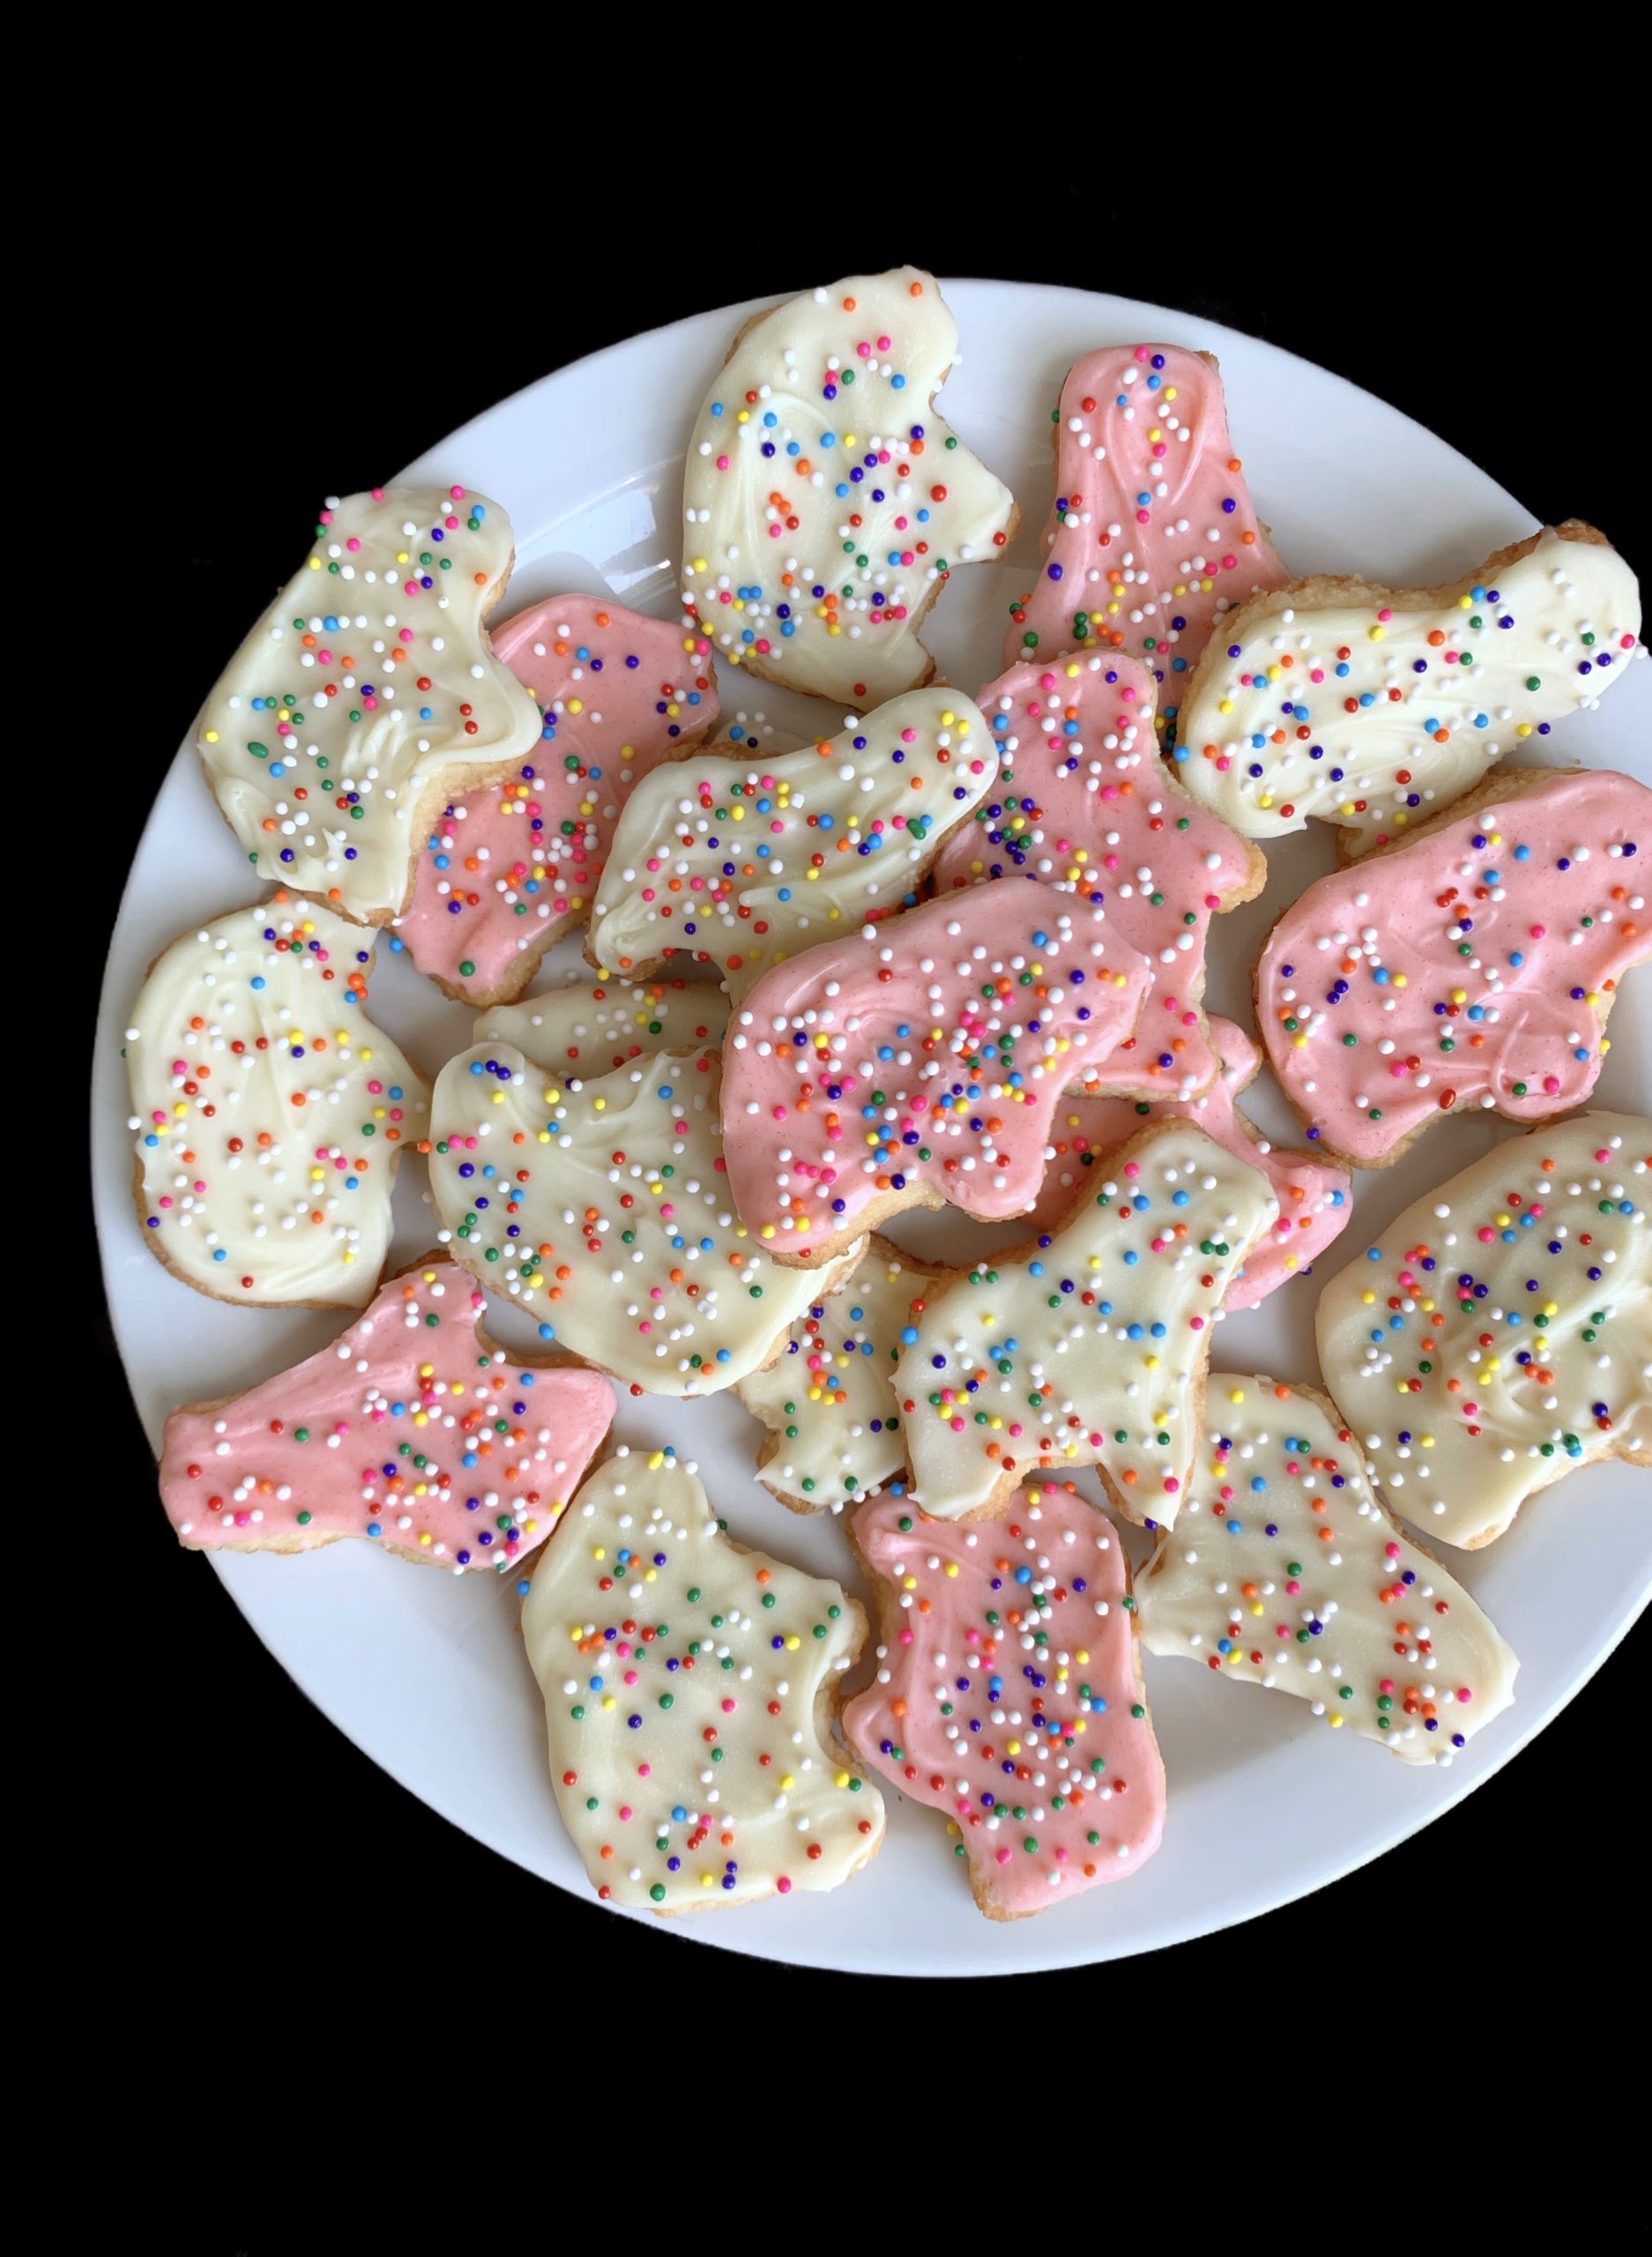 Keto sugar free frosted animal cookies